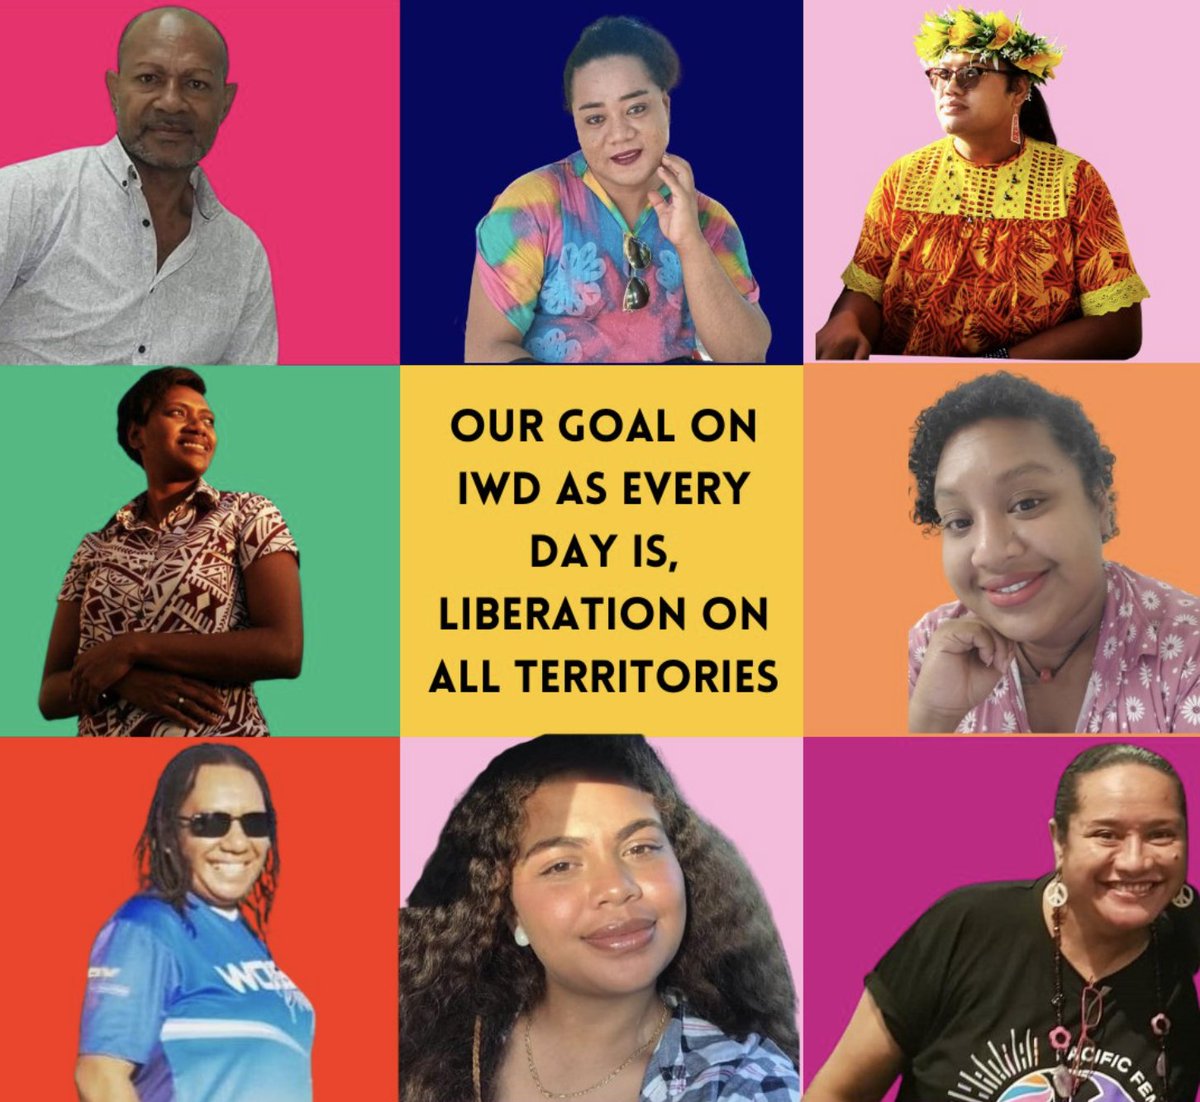 TODAY IS INTERNATIONAL WOMEN'S DAY!
We work for liberation on all territories. Join us.
#PacificFeminists #MovementsMatter #EveryoneShouldBeAFeminist